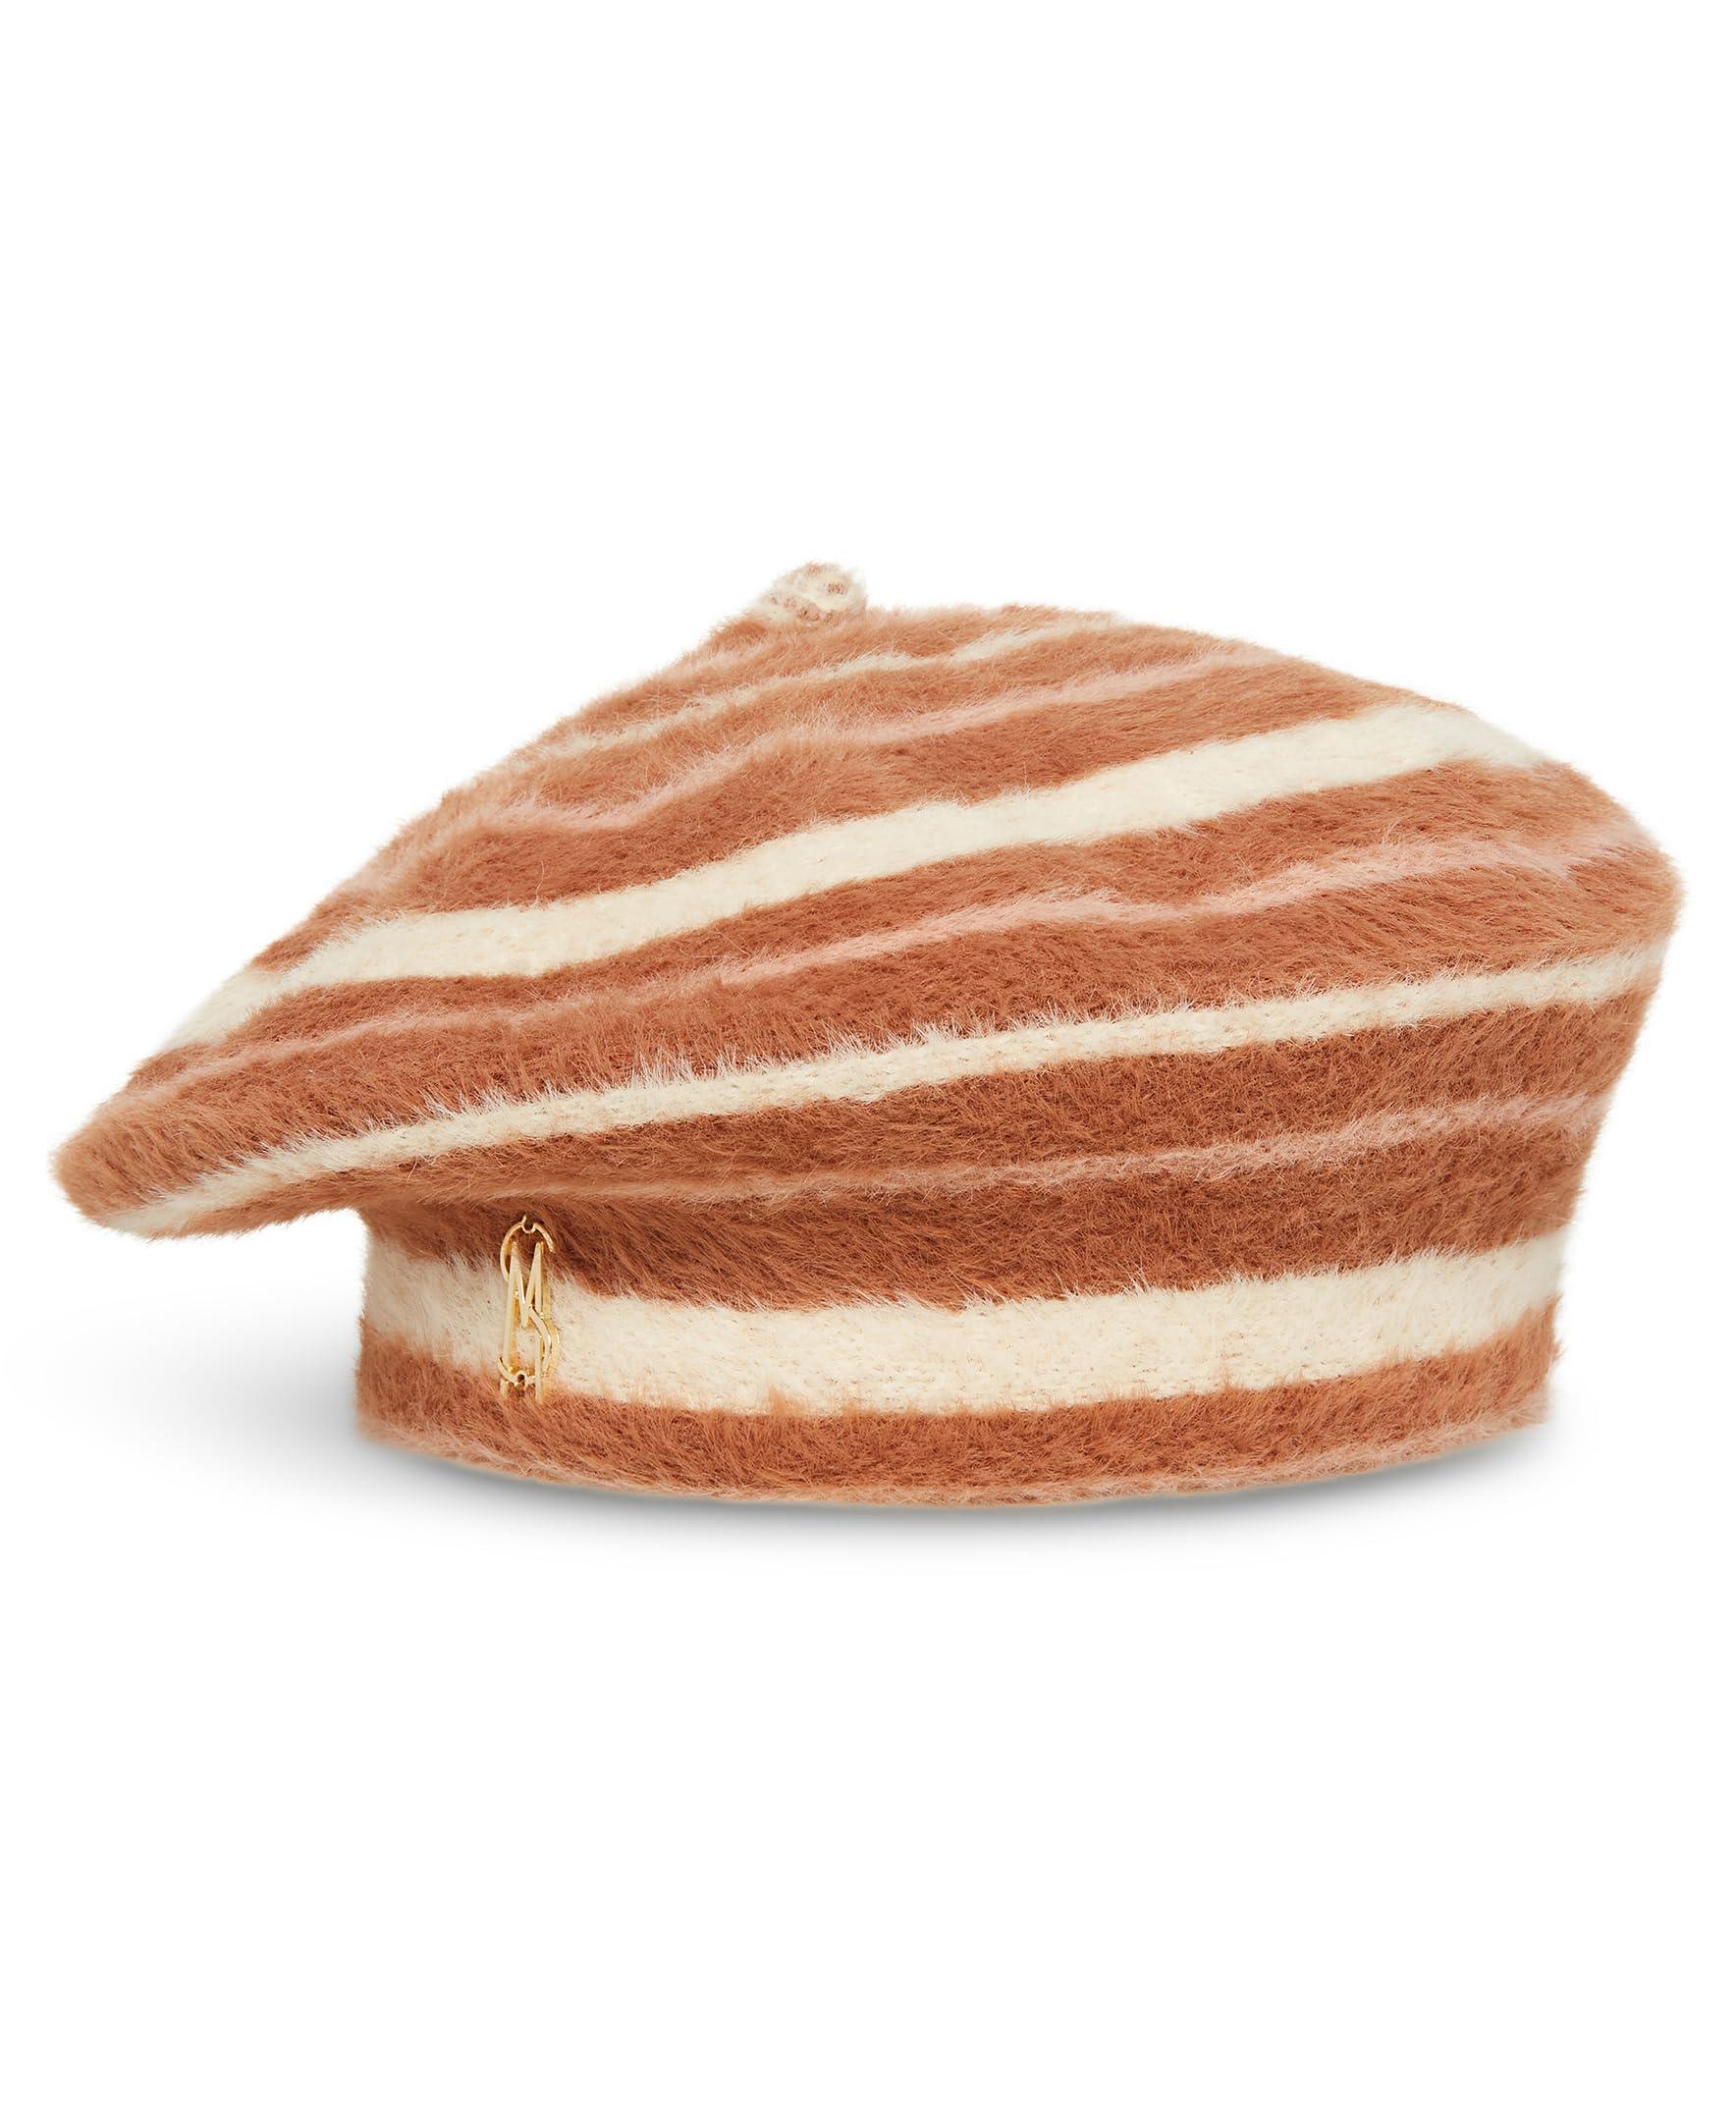 Steve Madden Classic Variegated Stripe Knit Beret in Brown | Lyst